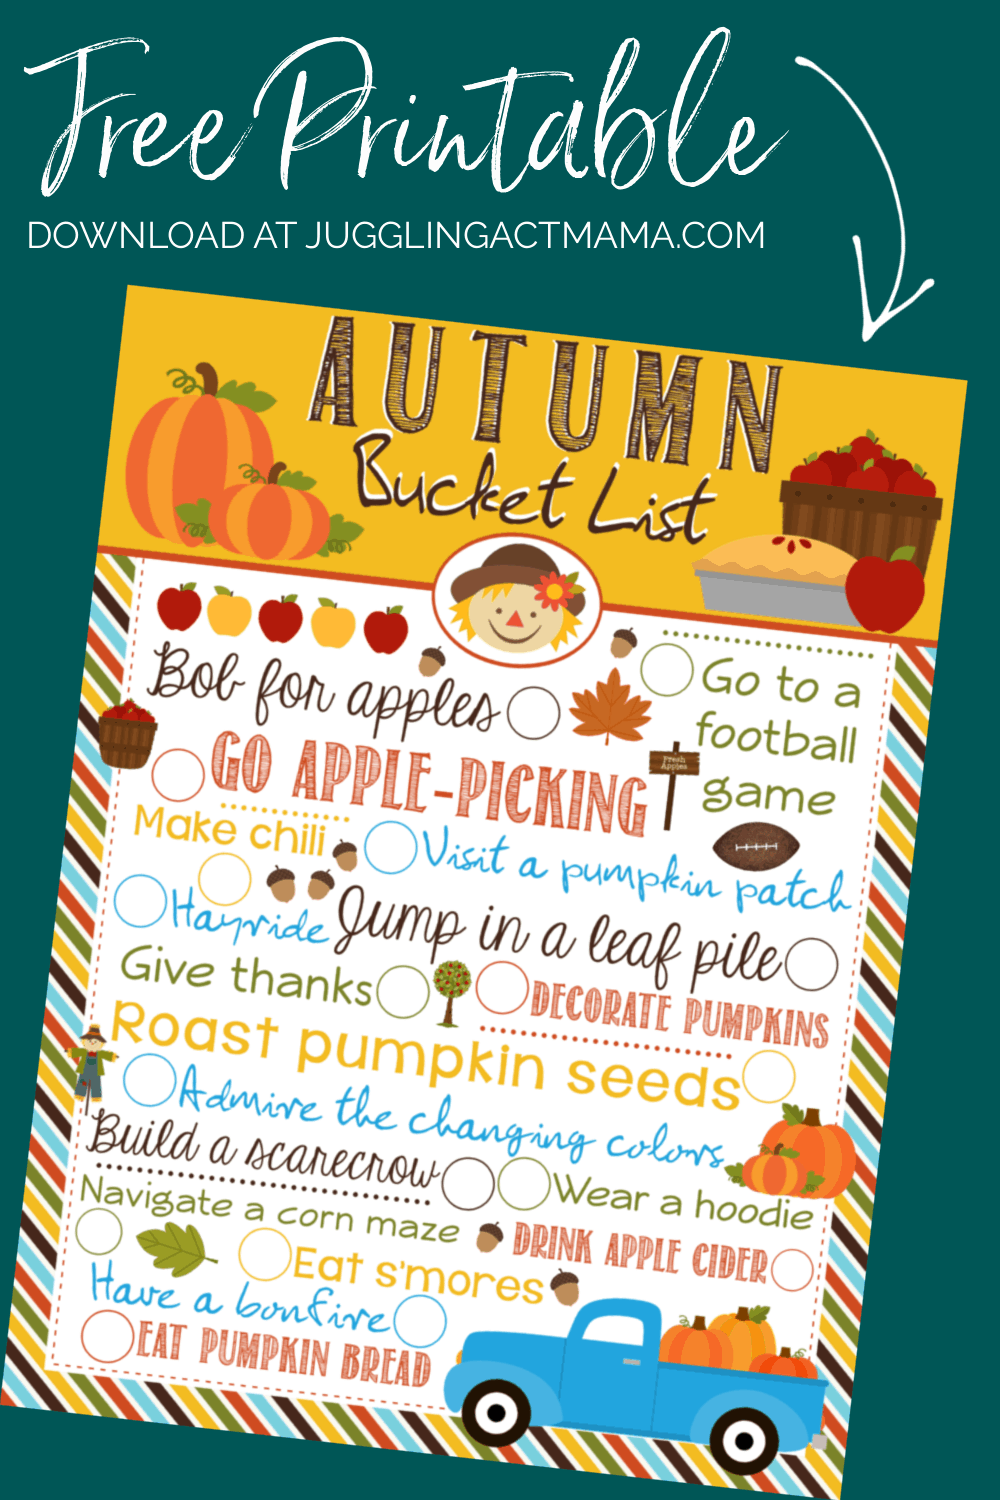 This Autumn Bucket List is a free download that you can print and display in your home with loads of ideas for a fun Fall season. via @jugglingactmama